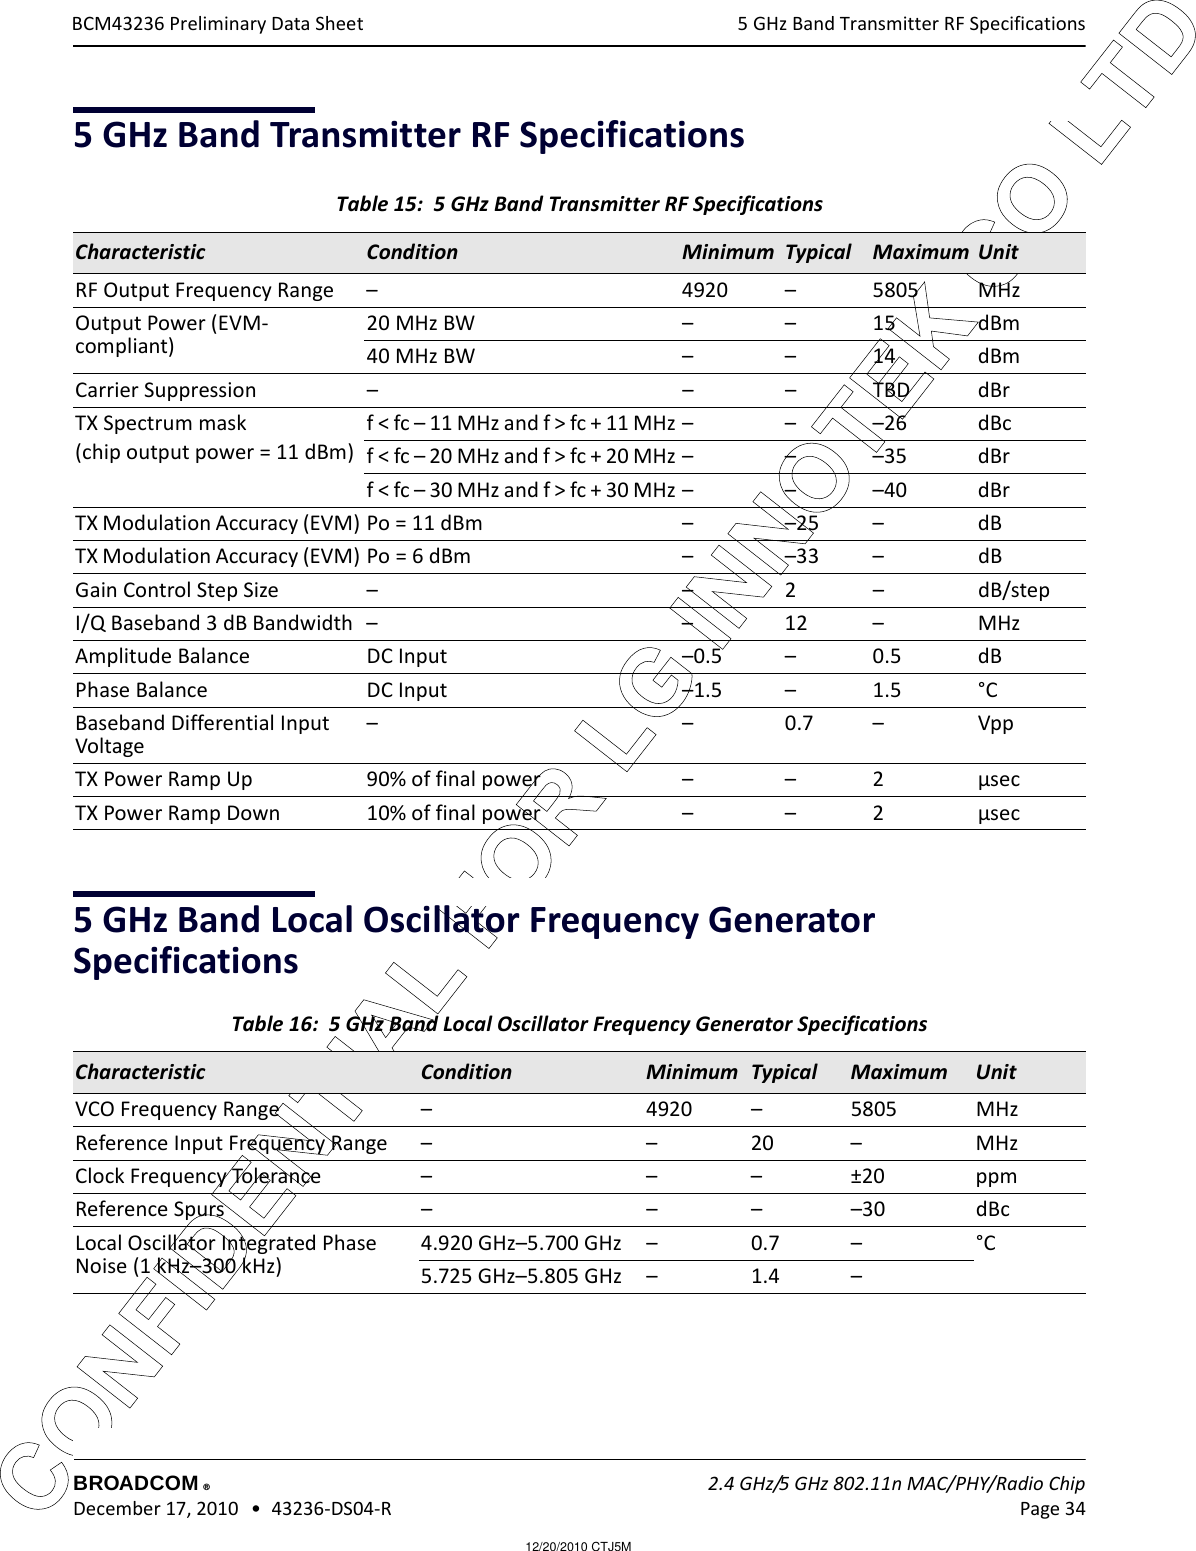 12/20/2010 CTJ5MCONFIDENTIAL FOR LG INNOTEK CO LTD 5 GHz Band Transmitter RF SpecificationsBROADCOM    2.4 GHz/5 GHz 802.11n MAC/PHY/Radio Chip December 17, 2010   •  43236-DS04-R Page 34®BCM43236 Preliminary Data Sheet5 GHz Band Transmitter RF Specifications5 GHz Band Local Oscillator Frequency Generator SpecificationsTable 15:  5 GHz Band Transmitter RF Specifications Characteristic Condition Minimum Typical  Maximum UnitRF Output Frequency Range – 4920 – 5805 MHzOutput Power (EVM-compliant)20 MHz BW – – 15 dBm40 MHz BW – – 14 dBmCarrier Suppression – – – TBD dBrTX Spectrum mask(chip output power = 11 dBm)f &lt; fc – 11 MHz and f &gt; fc + 11 MHz – – –26 dBcf &lt; fc – 20 MHz and f &gt; fc + 20 MHz – – –35 dBrf &lt; fc – 30 MHz and f &gt; fc + 30 MHz – – –40 dBrTX Modulation Accuracy (EVM) Po = 11 dBm – –25 – dBTX Modulation Accuracy (EVM) Po = 6 dBm – –33 – dBGain Control Step Size – – 2  – dB/stepI/Q Baseband 3 dB Bandwidth – – 12 – MHzAmplitude Balance DC Input –0.5 – 0.5 dBPhase Balance DC Input –1.5 – 1.5 °CBaseband Differential Input Voltage––0.7–VppTX Power Ramp Up 90% of final power – – 2 µsecTX Power Ramp Down 10% of final power – – 2 µsecTable 16:  5 GHz Band Local Oscillator Frequency Generator Specifications Characteristic Condition Minimum Typical  Maximum UnitVCO Frequency Range – 4920 – 5805 MHzReference Input Frequency Range – – 20 – MHzClock Frequency Tolerance – – – ±20 ppmReference Spurs – – – –30 dBcLocal Oscillator Integrated Phase Noise (1 kHz–300 kHz)4.920 GHz–5.700 GHz – 0.7 – °C5.725 GHz–5.805 GHz – 1.4 –